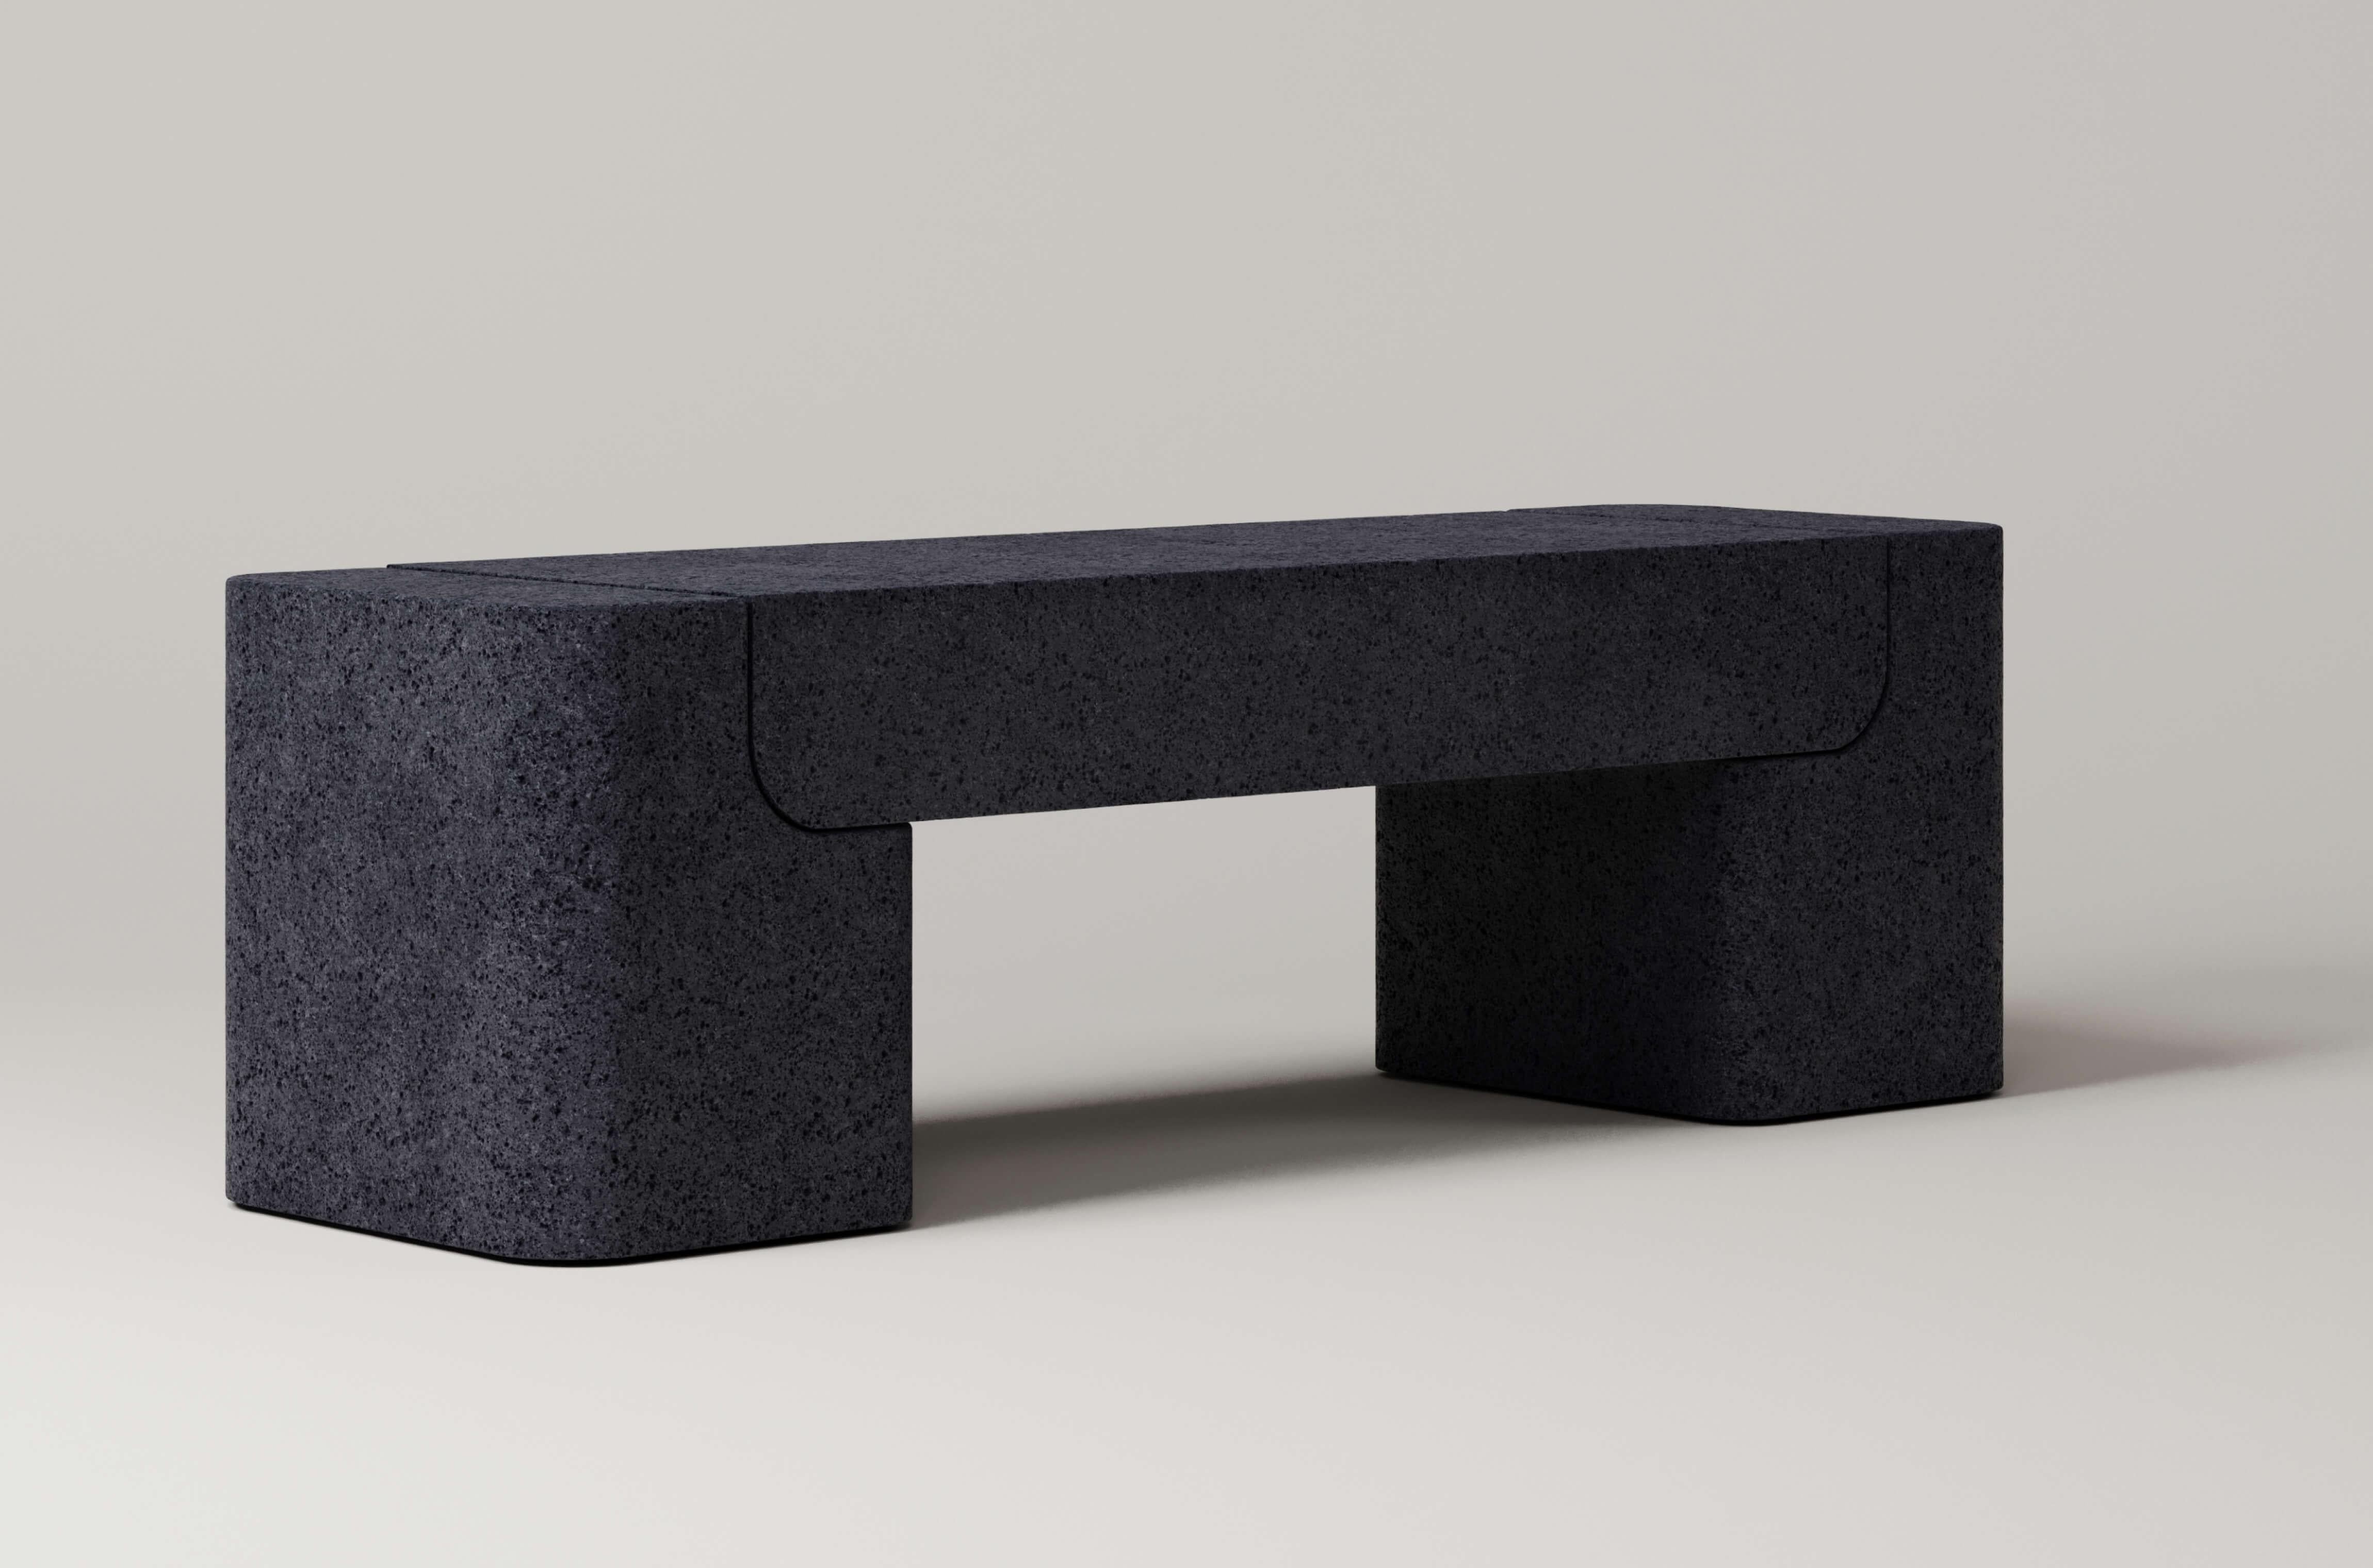 M_005 Lava Rock Bench by Monolith Studio
Signed and Numbered.
Dimensions: D 40 x W 132 x H 40 cm.
Materials: Lava rock.

Available in travertine, walnut, white oak and lava rock.  Please contact us. 

Monolith, founded in 2022 by Marc Personick,